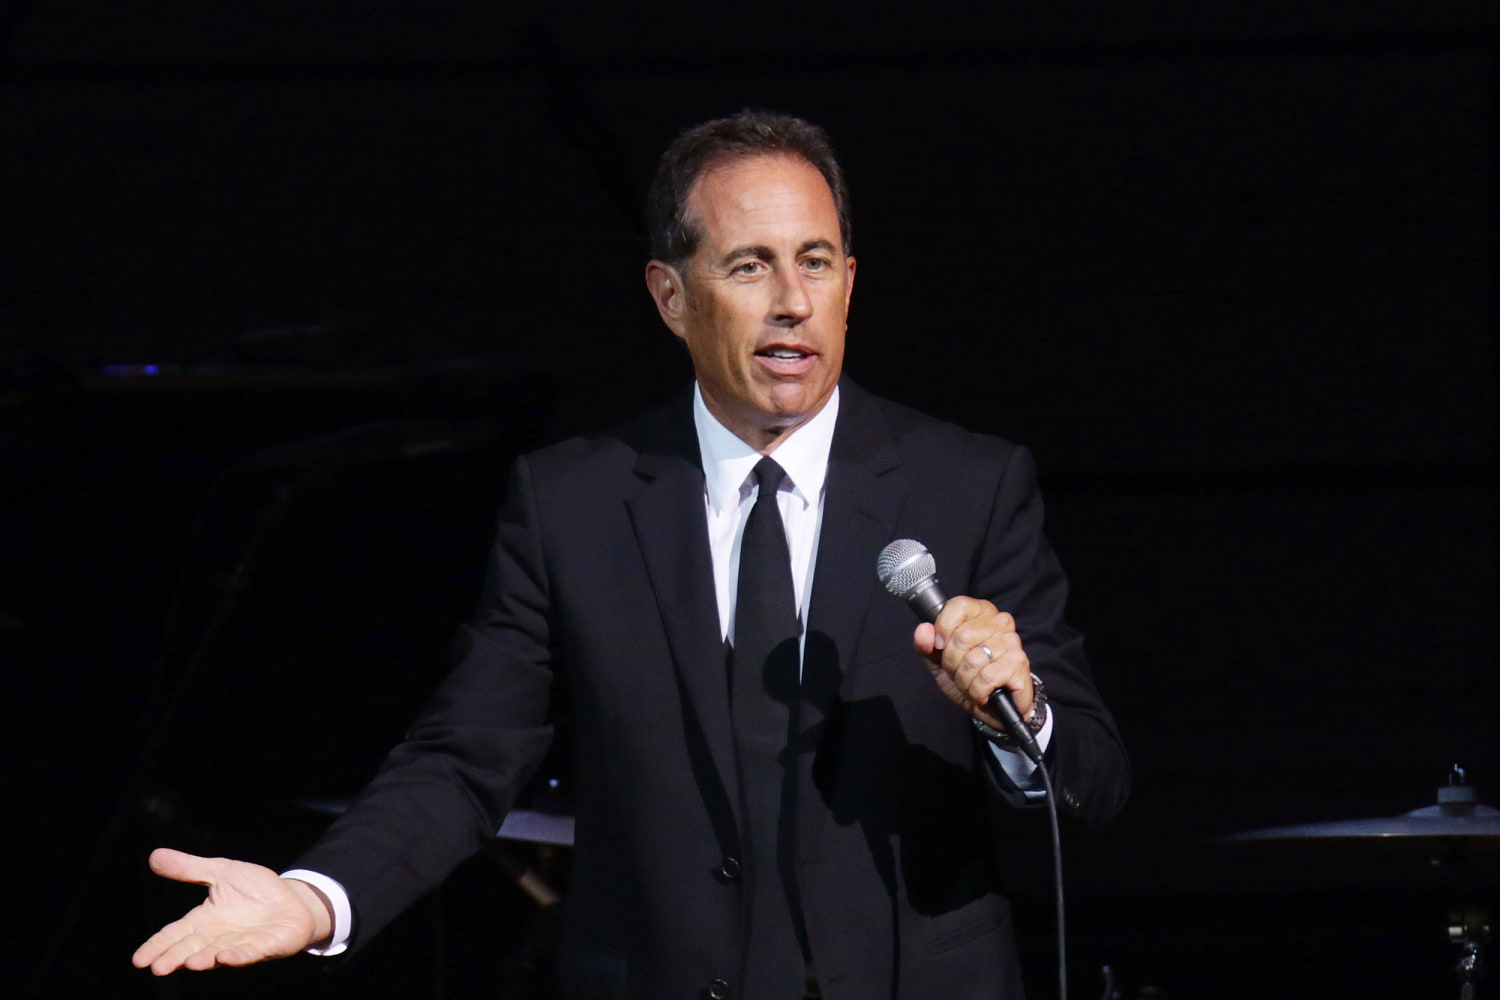 'I like a real man': Jerry Seinfeld says he misses 'dominant masculinity'